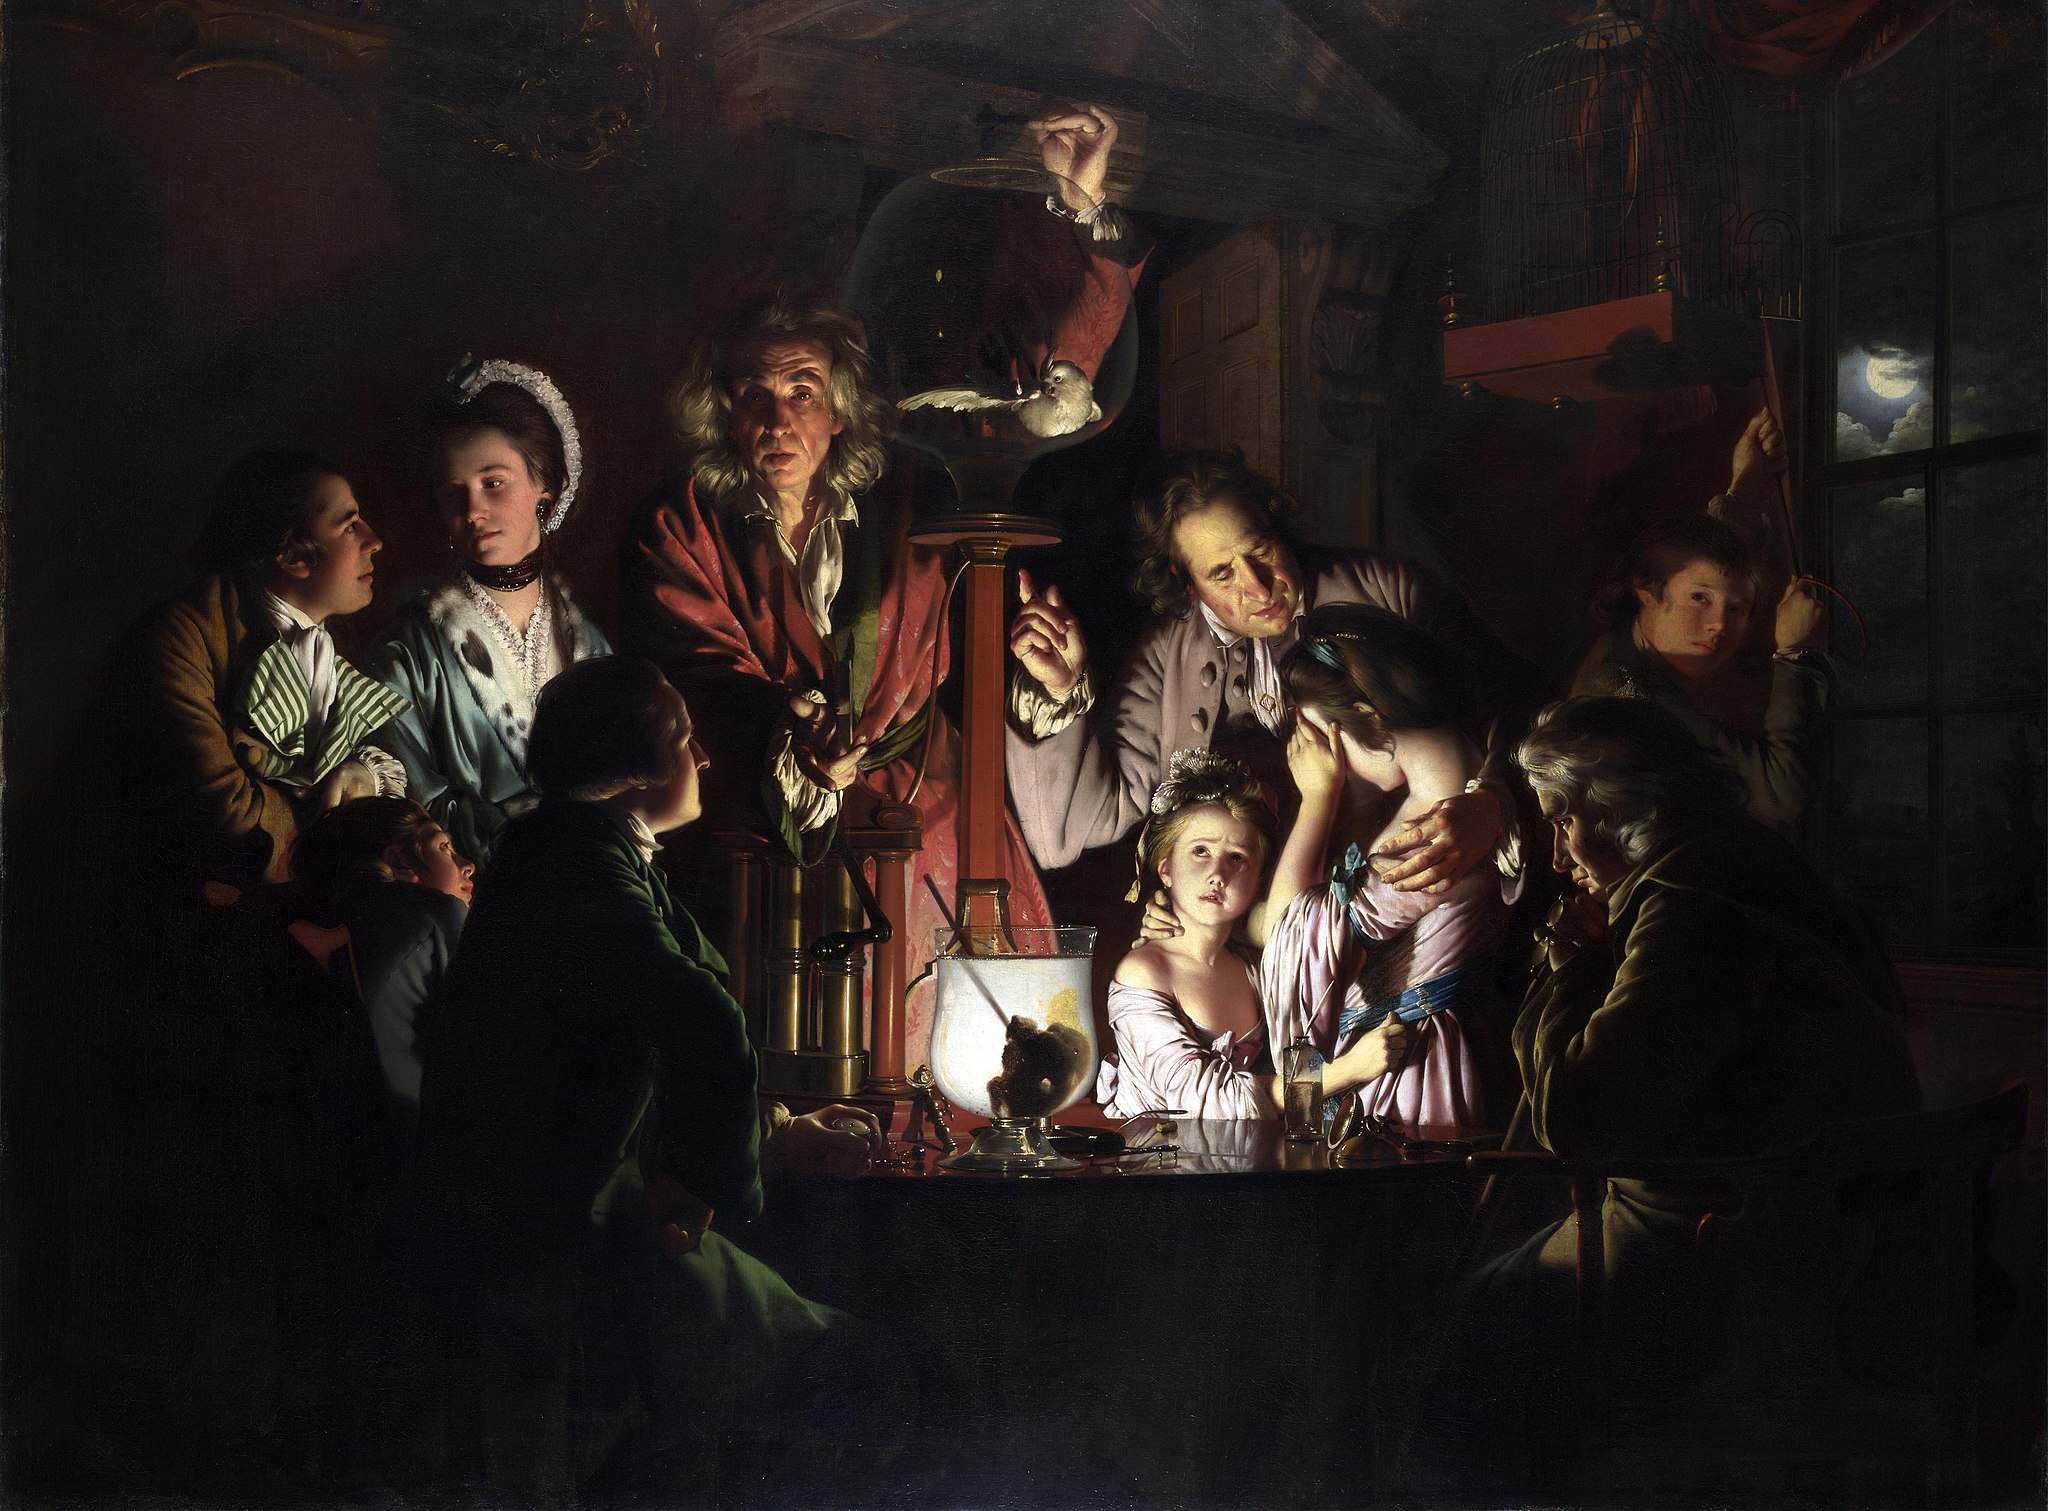 Joseph Wright of Derby, An Experiment on a Bird in the Air Pump, 1768